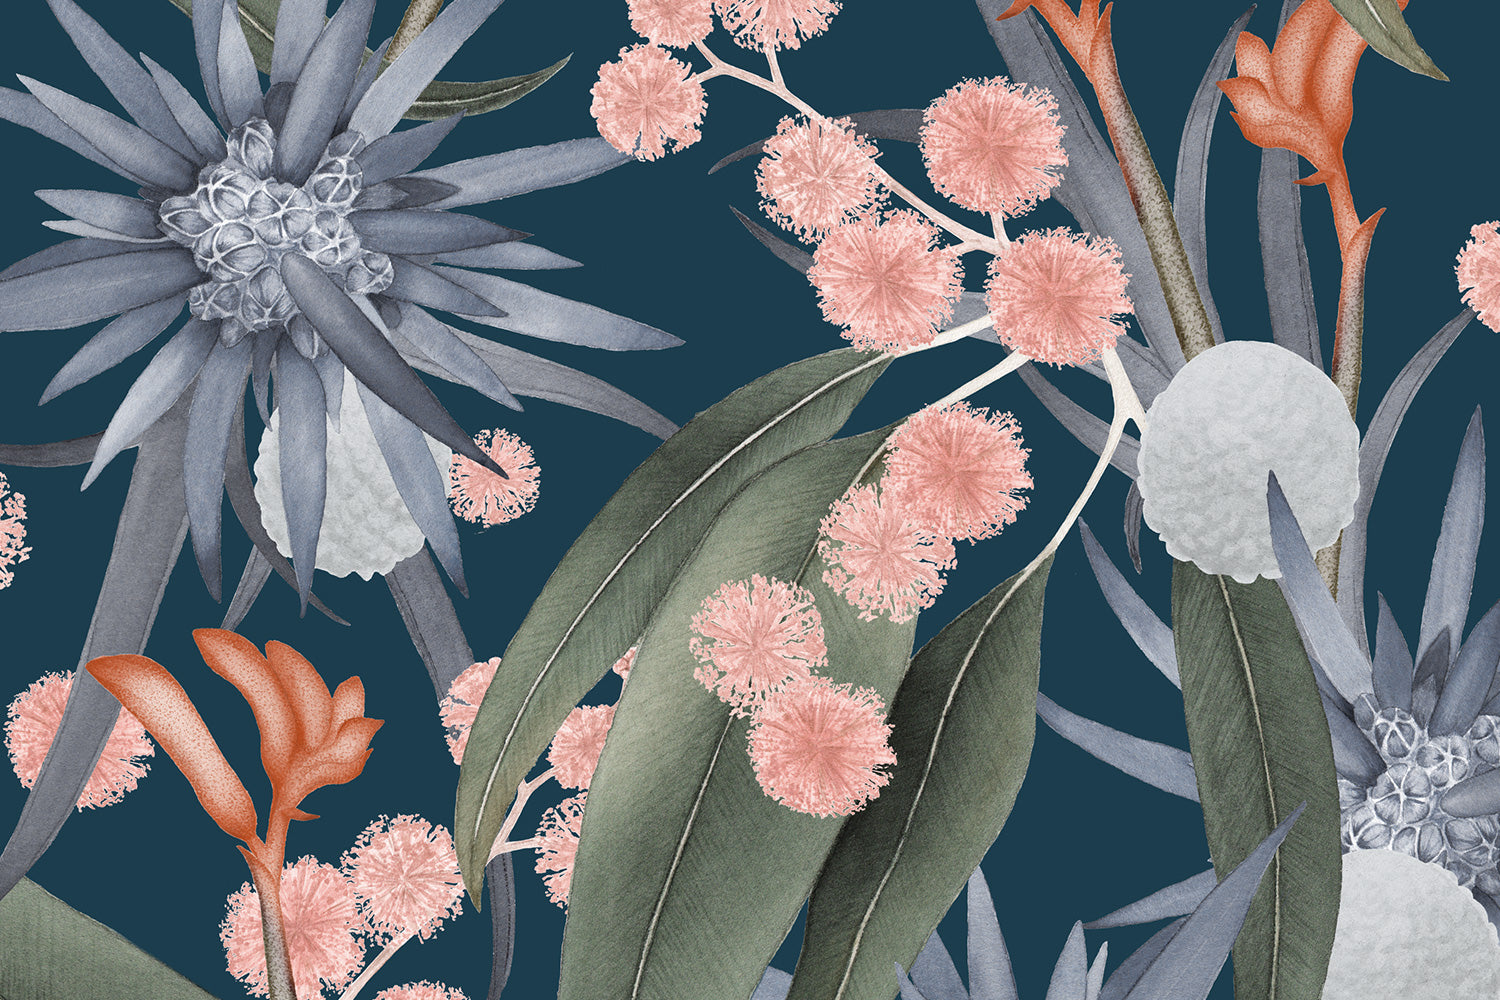 Detail of wallpaper in a large-scale botanical print in shades of blue, green and pink on a navy field.